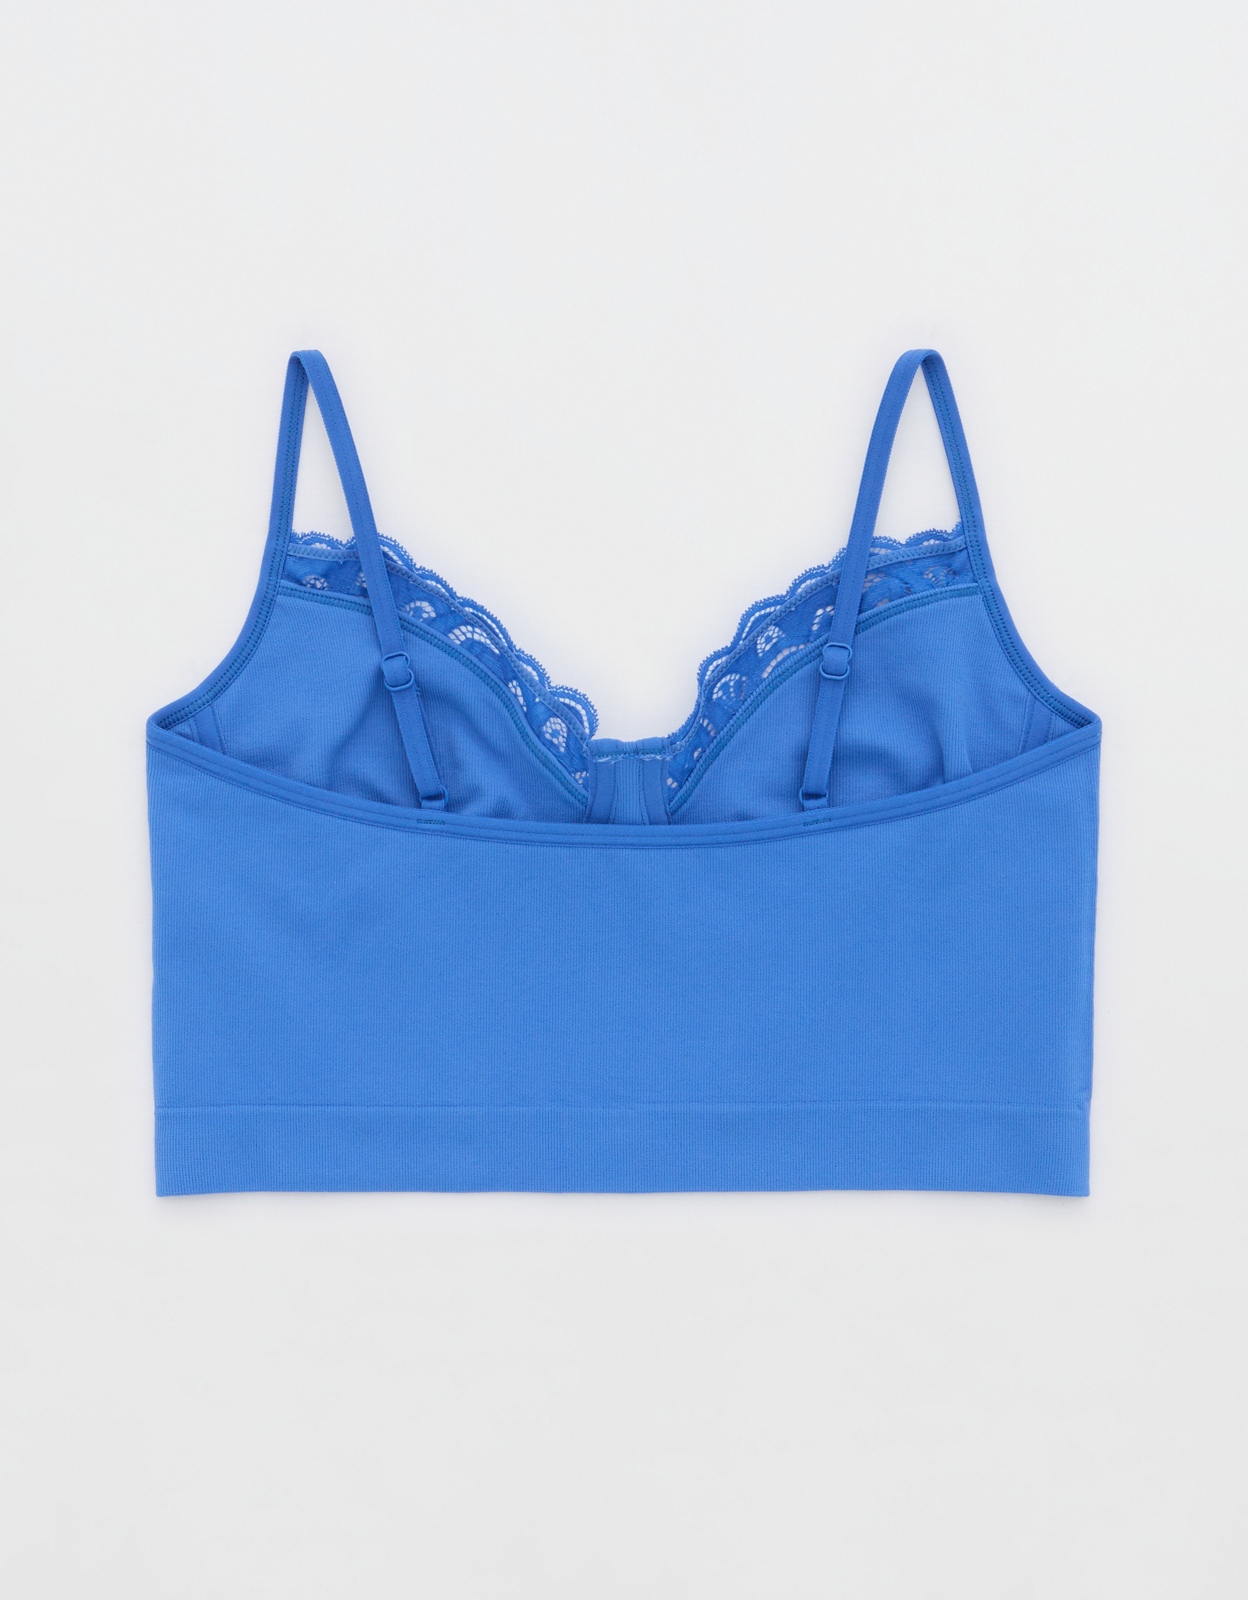 AERIE Women's Blue & WhiteStretchy Crop Top Tank Built-in Bra Lounge Size  Large